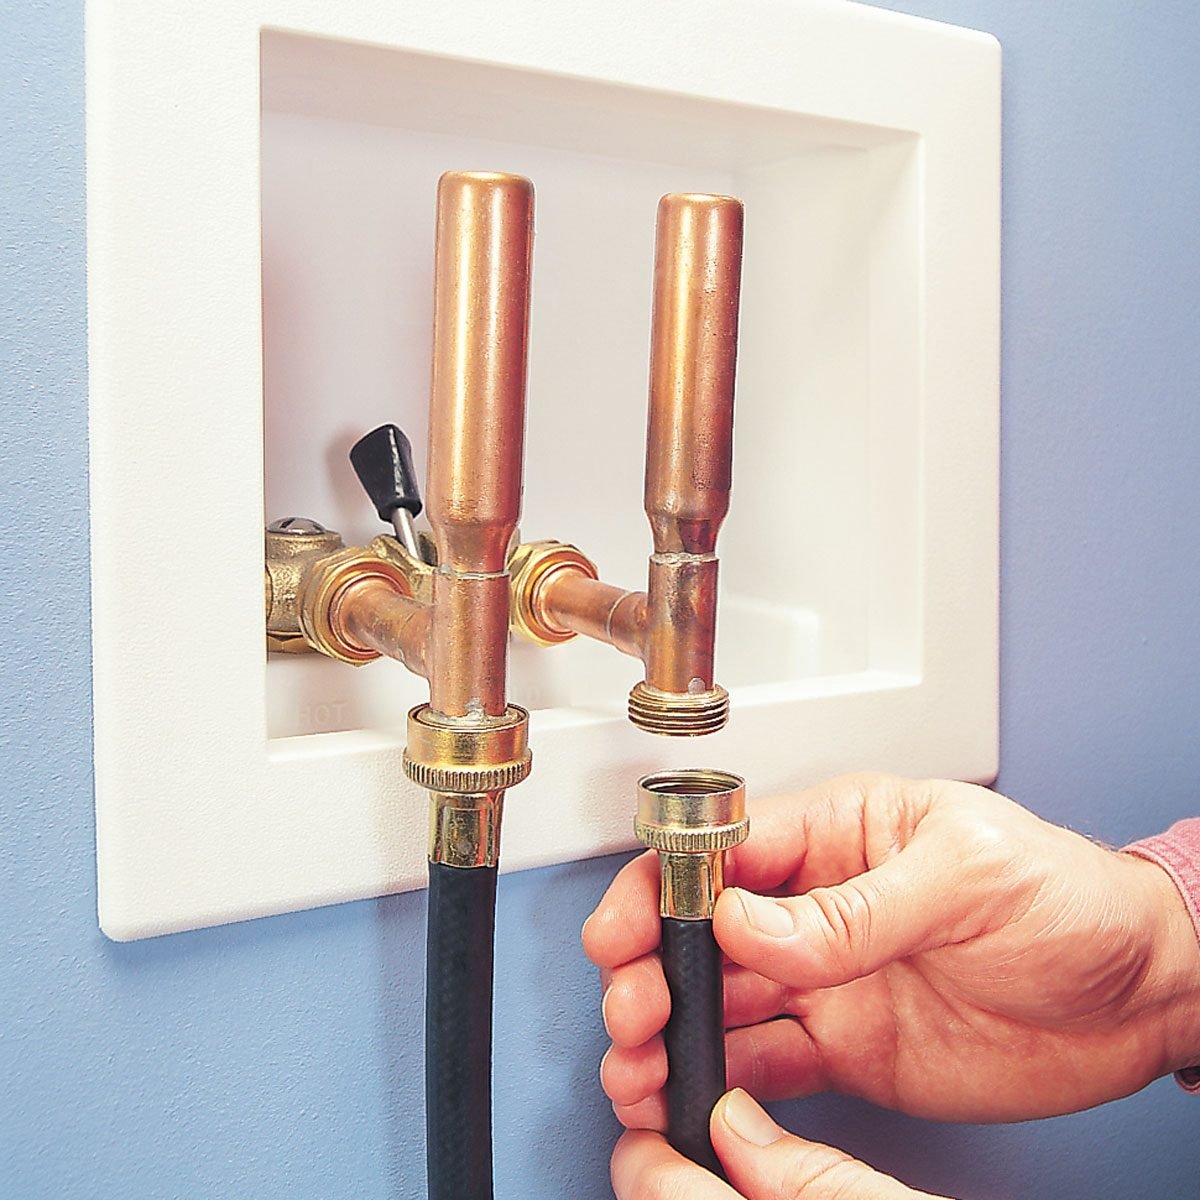 Water Pipes Making a Banging Noise? Here's How to Fix It